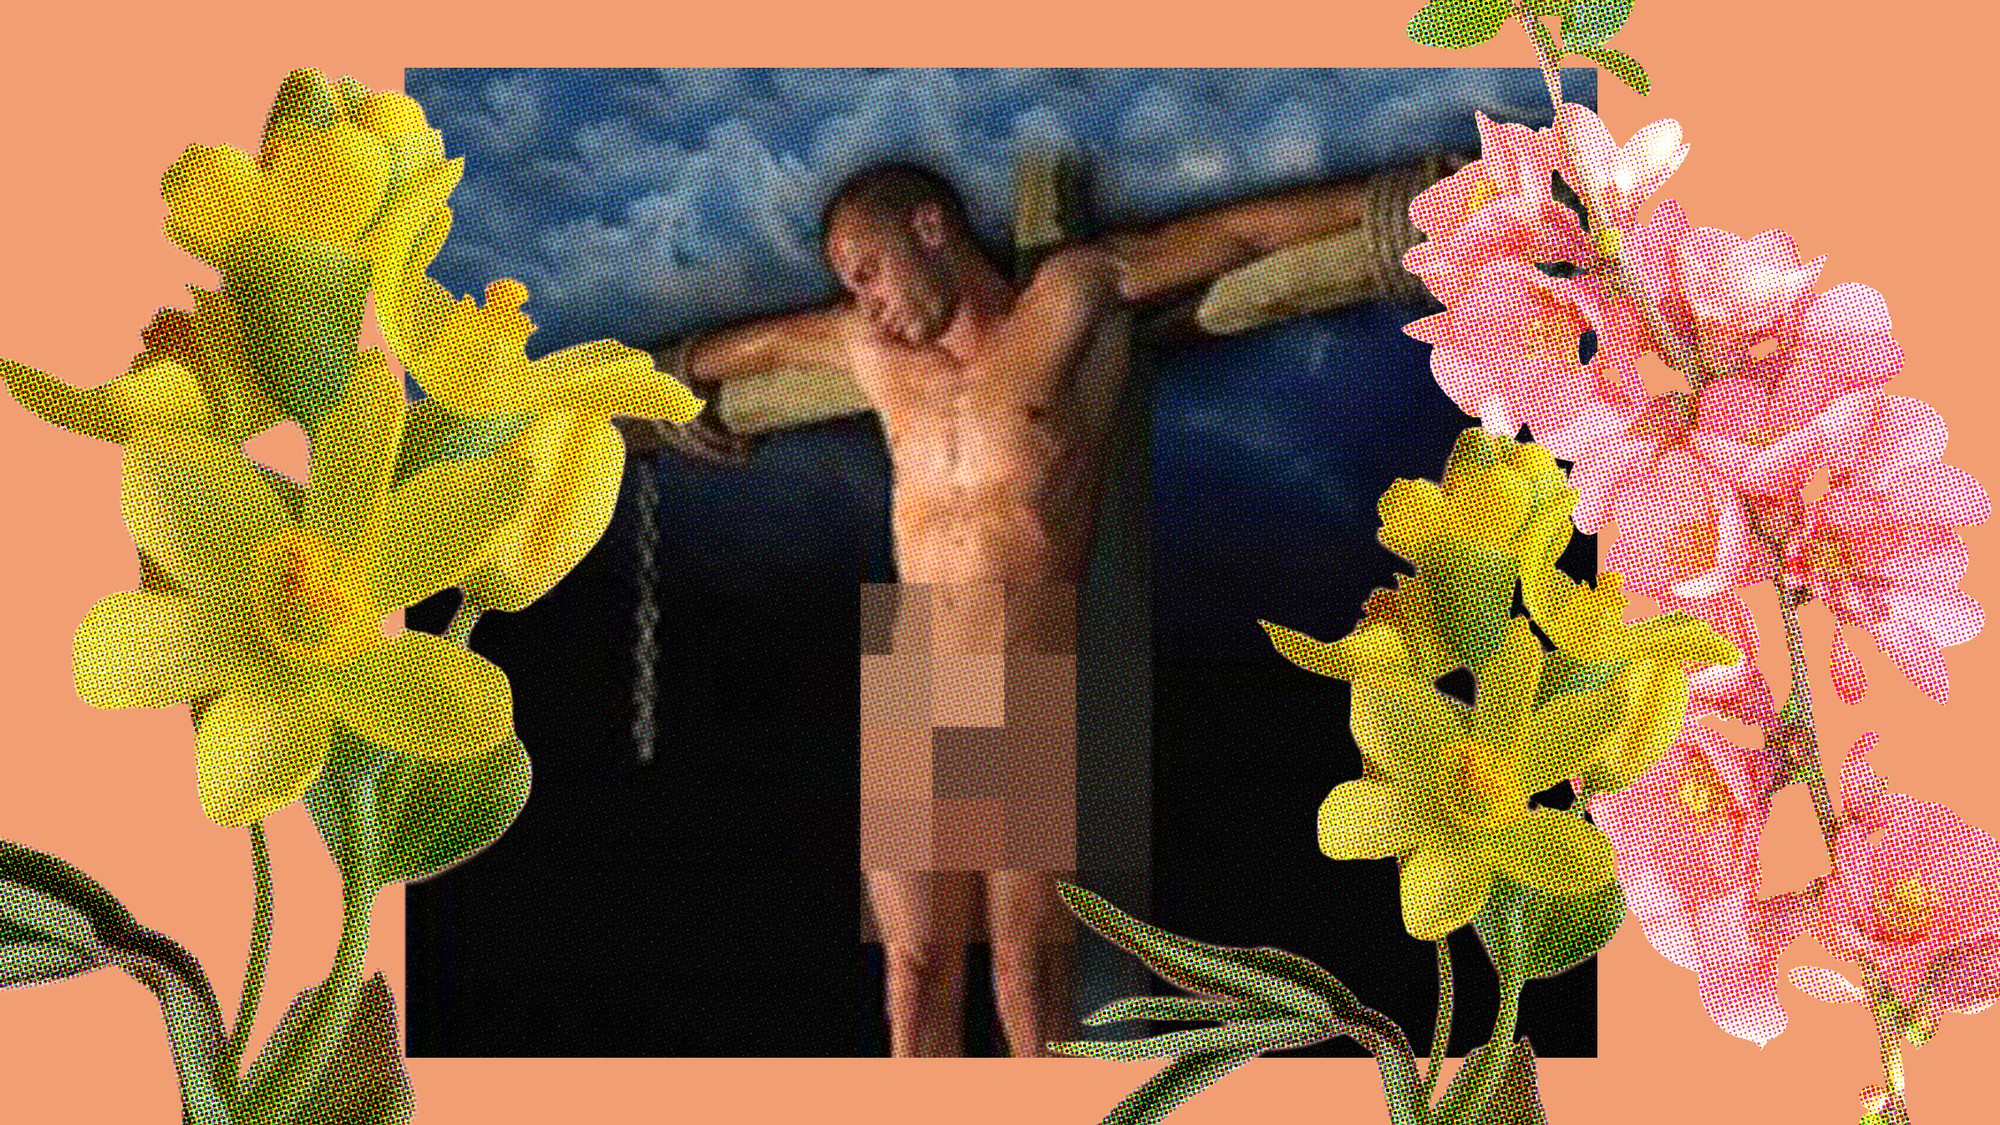 Religious Porn Art - The Incredible Story of 'Passio,' the Gay Porno Starring Jesus - VICE TV